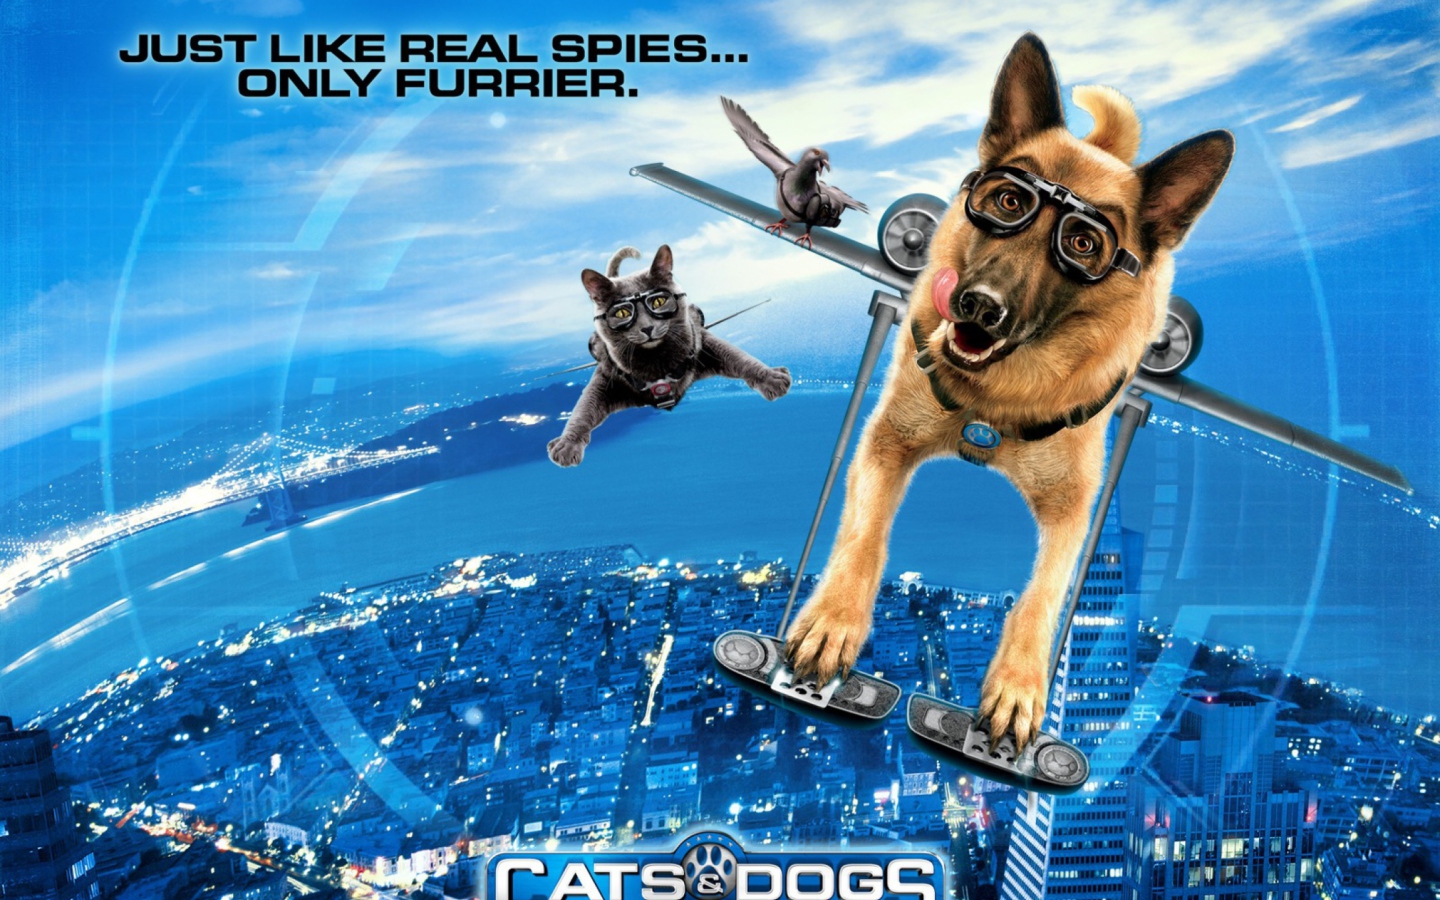 Cats & Dogs: The Revenge of Kitty Galore wallpaper 1440x900